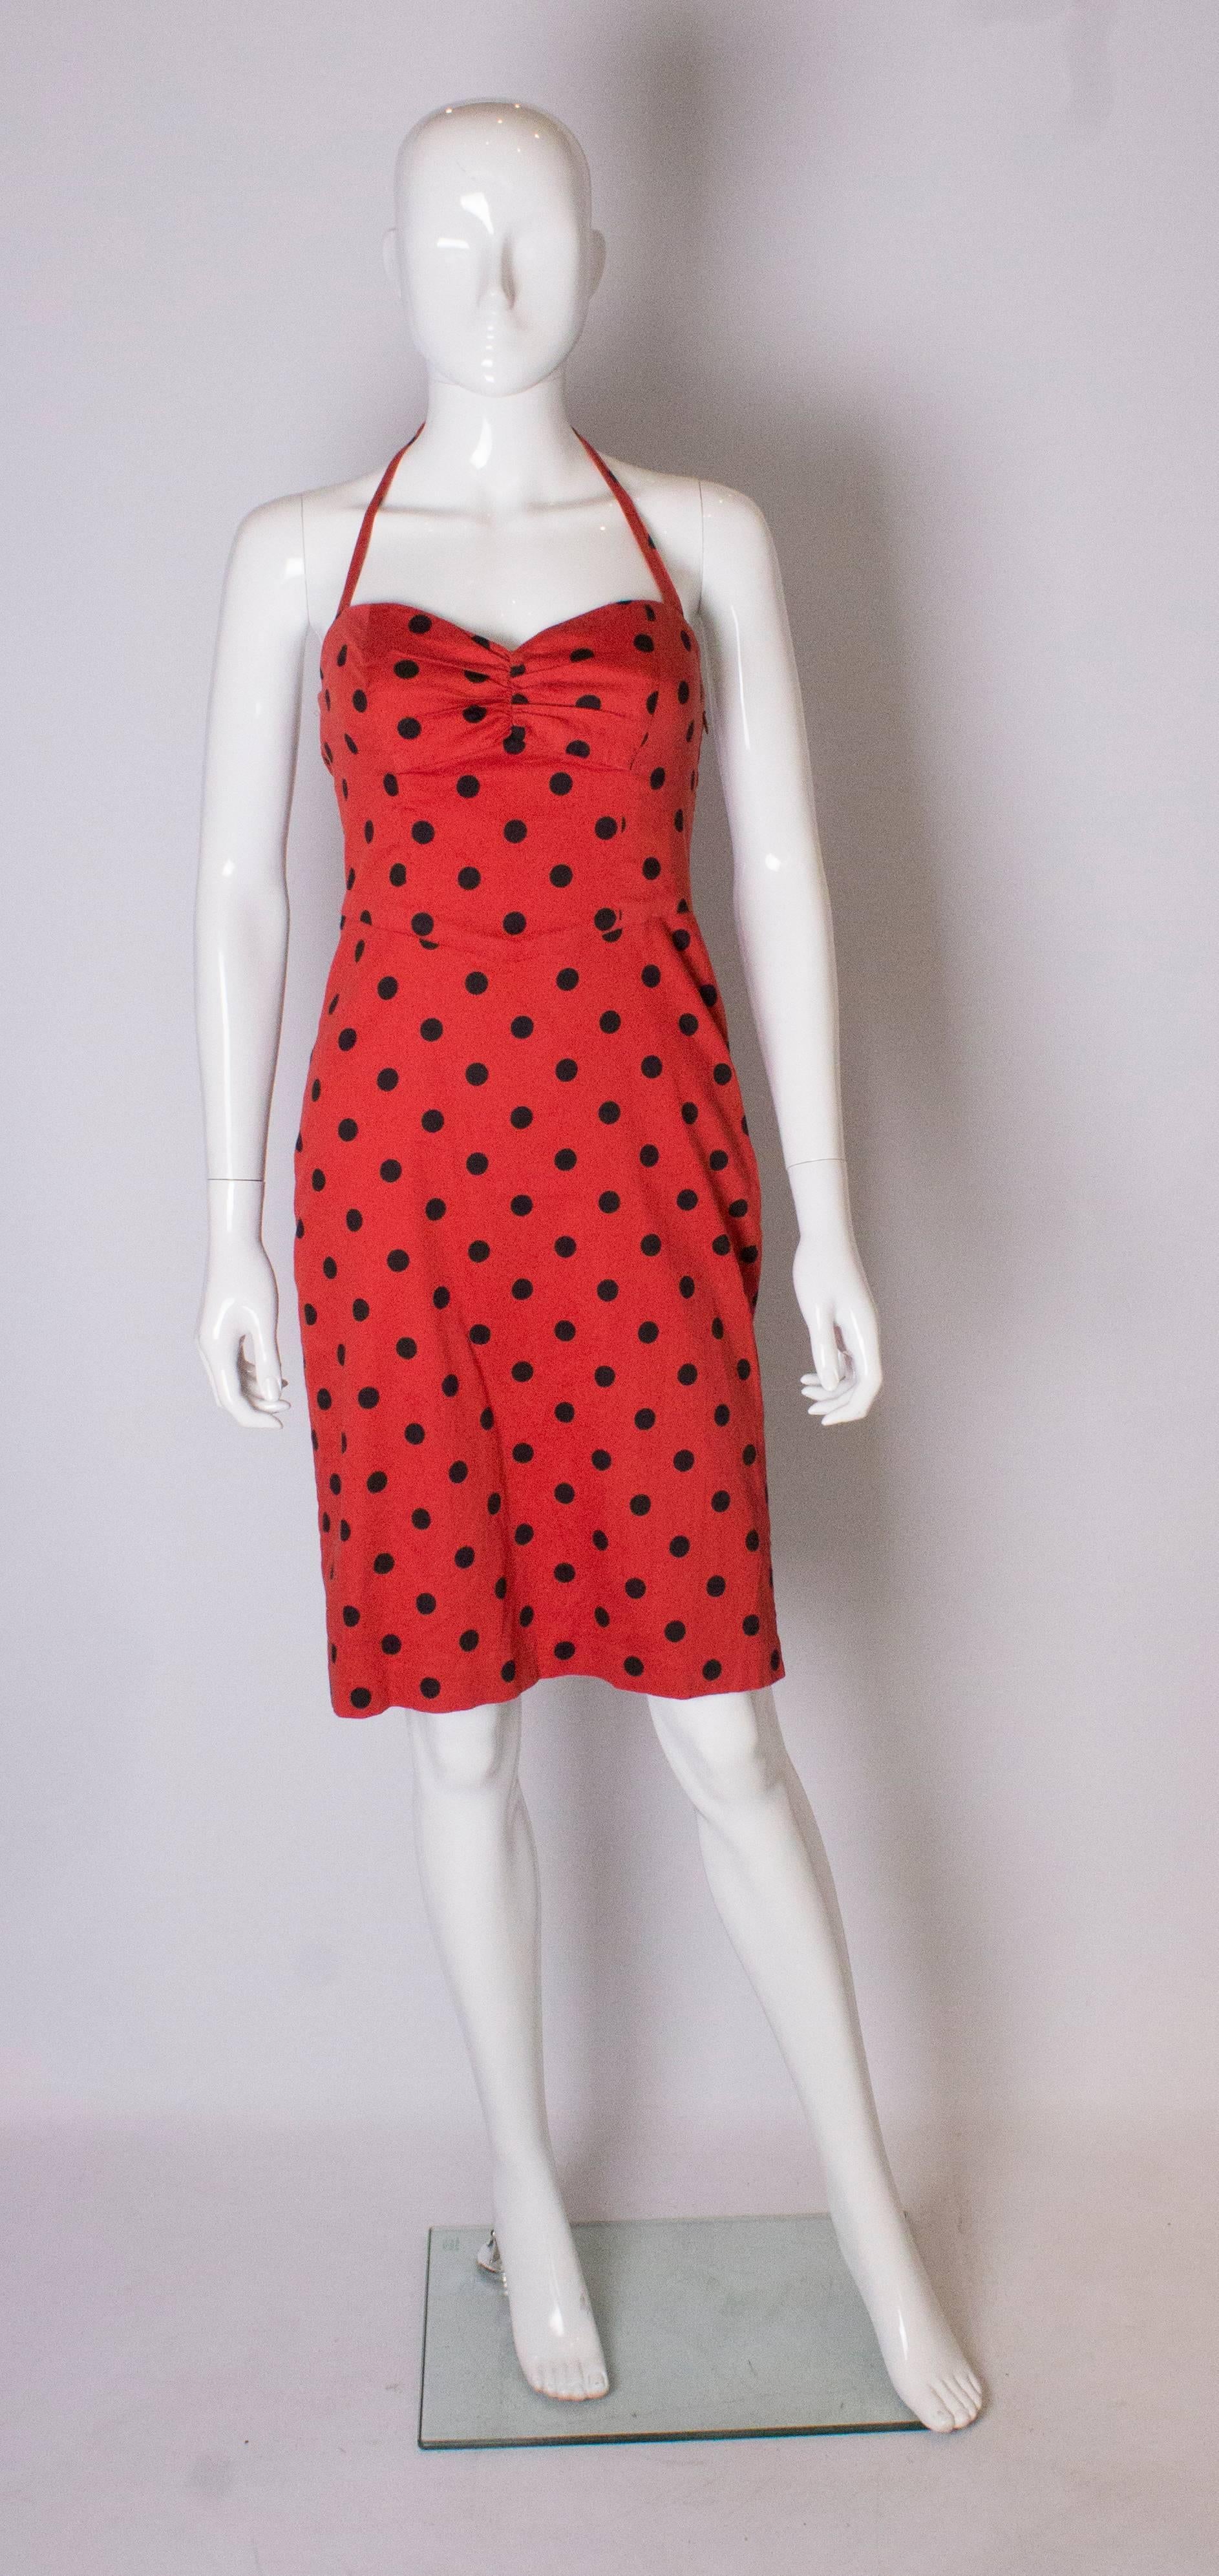 A great  vintage summer party dress by Betsey Johnson.  In red cotton with black dots, the dress  has a halter neck with an elastic back , and gathering at the bust.